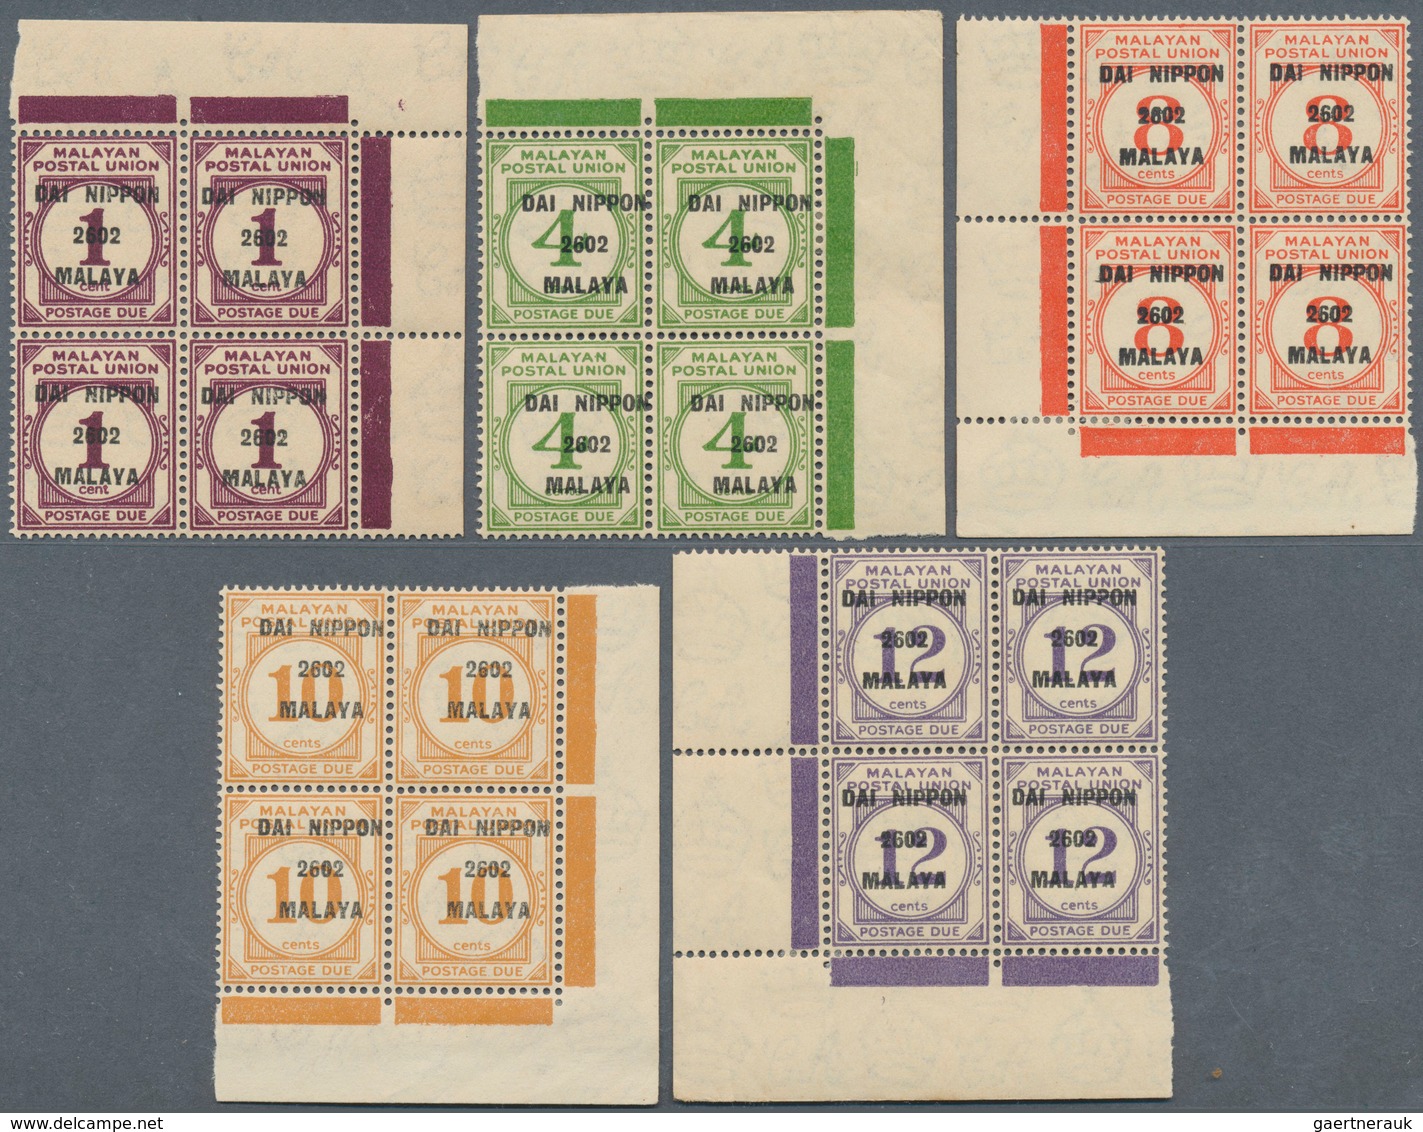 Malaiischer Staatenbund - Portomarken: Japanese Occupation, 1942, General Issues, Postage Due Stamps - Federated Malay States